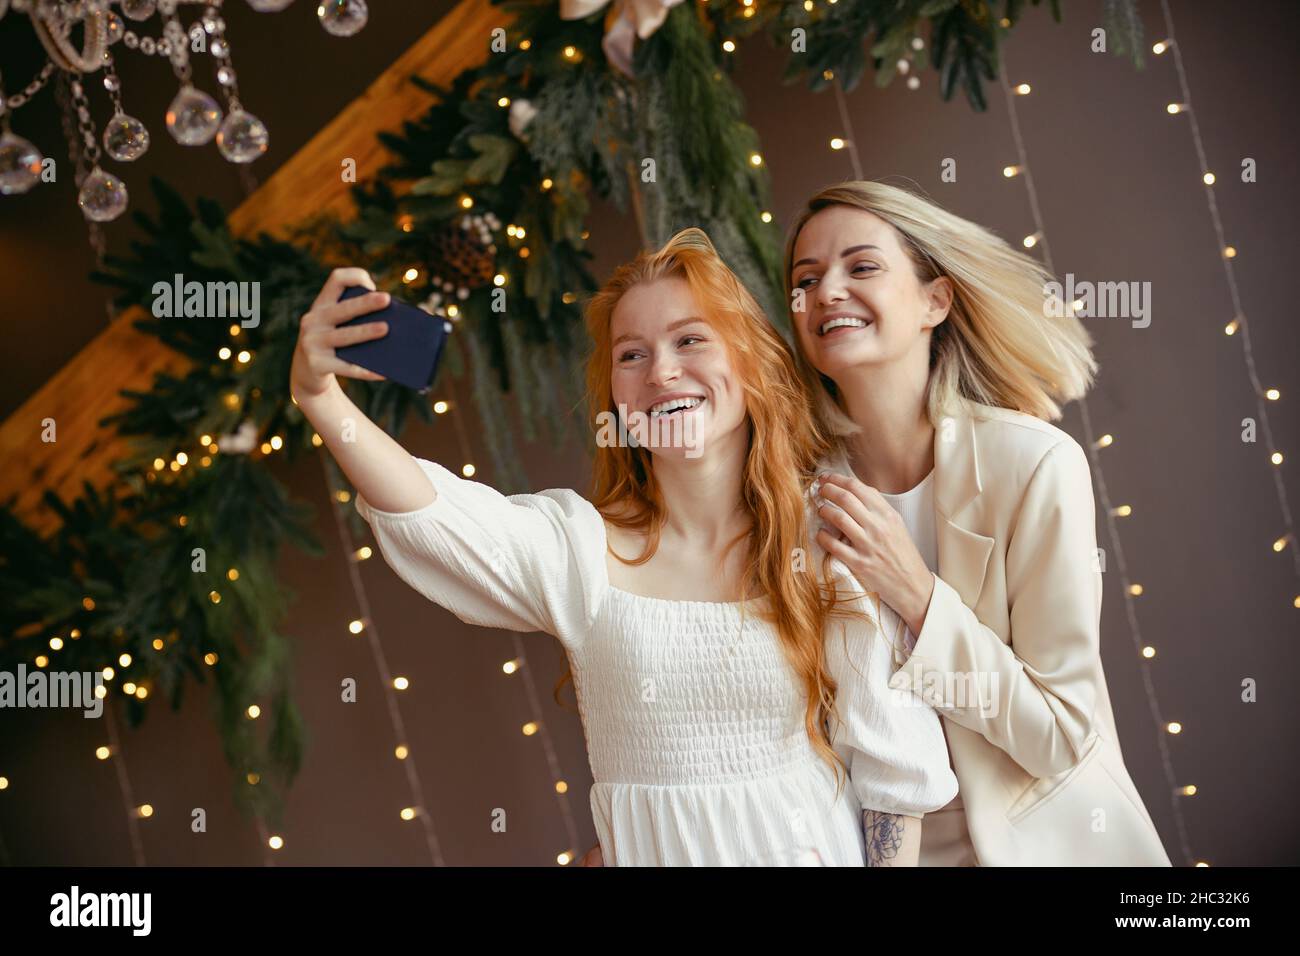 Lesbian couple takes a selfie on their phone, girls smile and have a good time together. Stock Photo